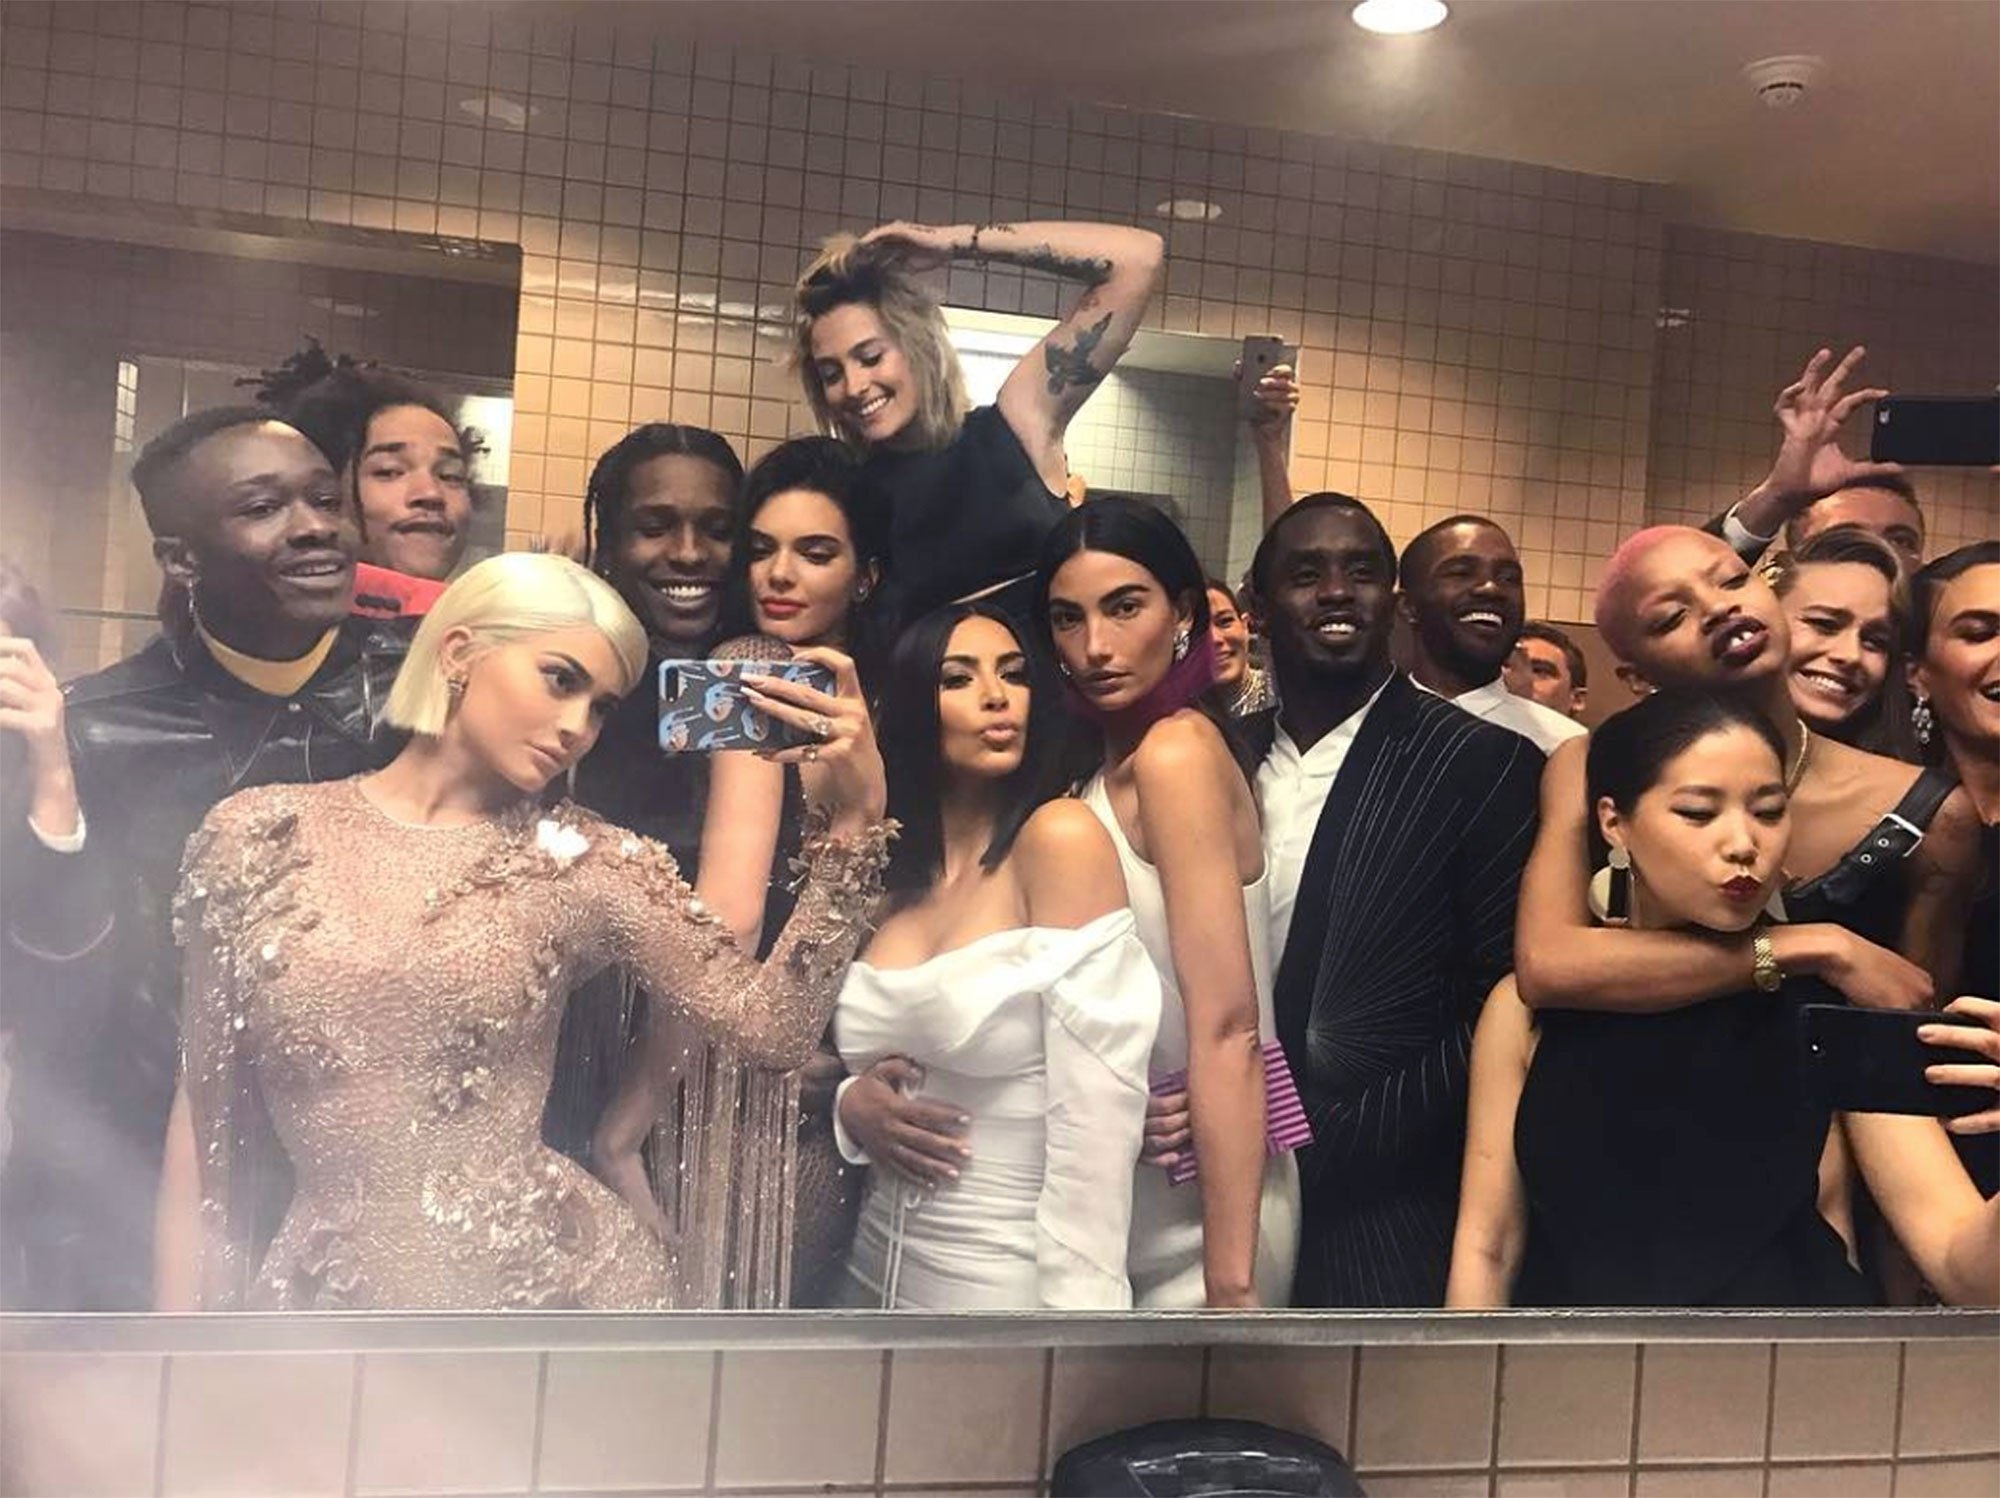 Kendall Jenner and A$AP Rocky Cuddle Up in Epic Bathroom Selfie at Met Gala